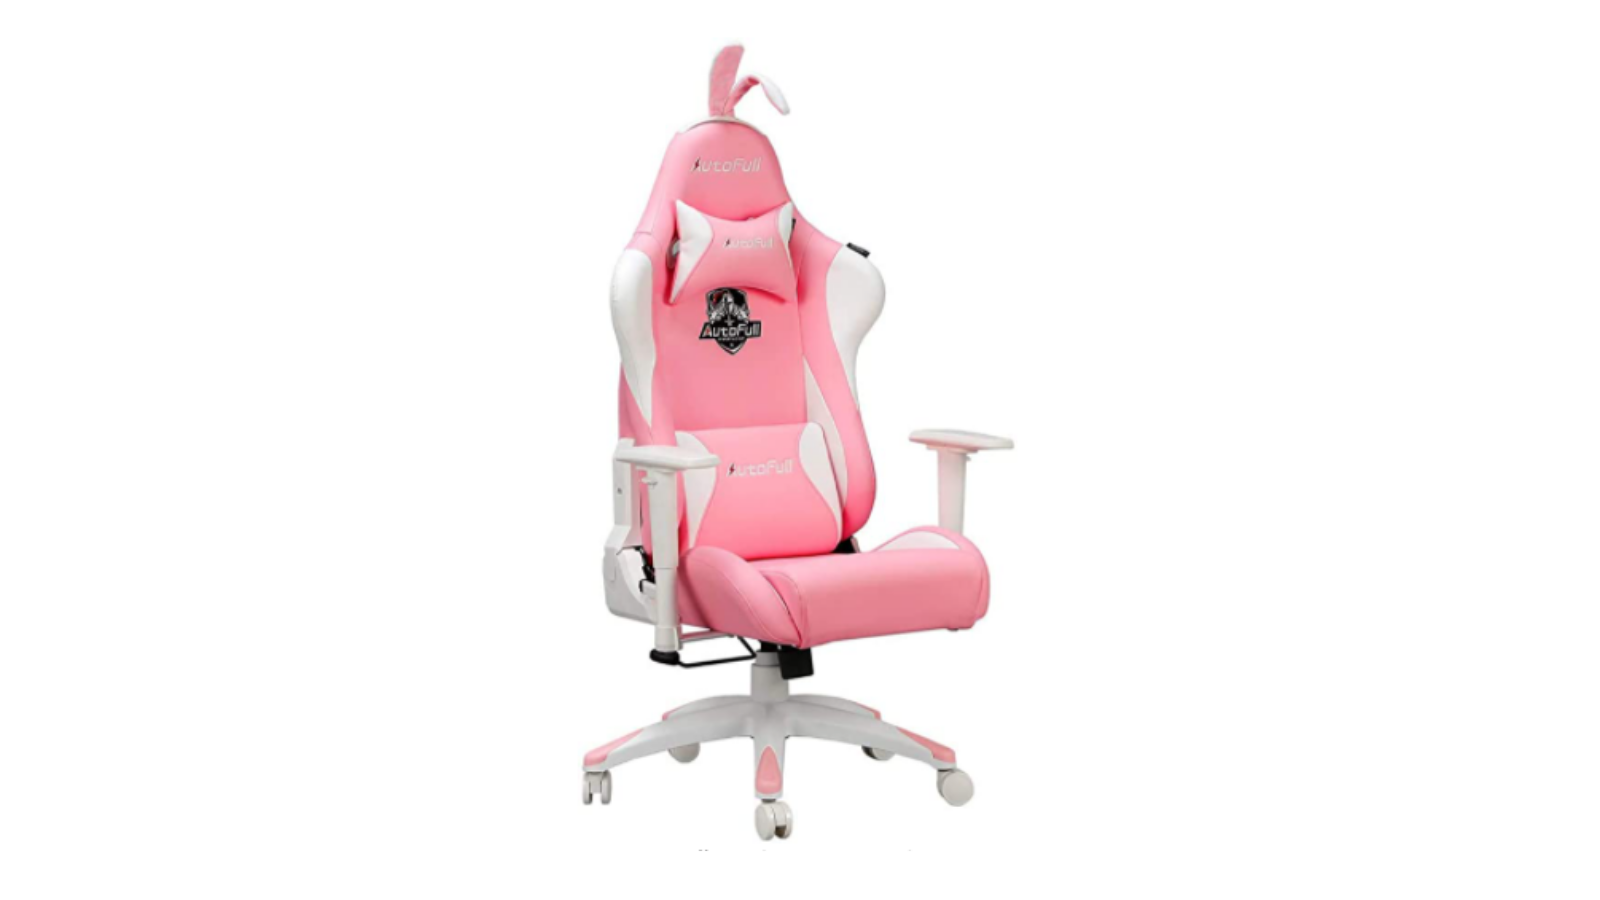 AutoFull Pink Gaming Chair